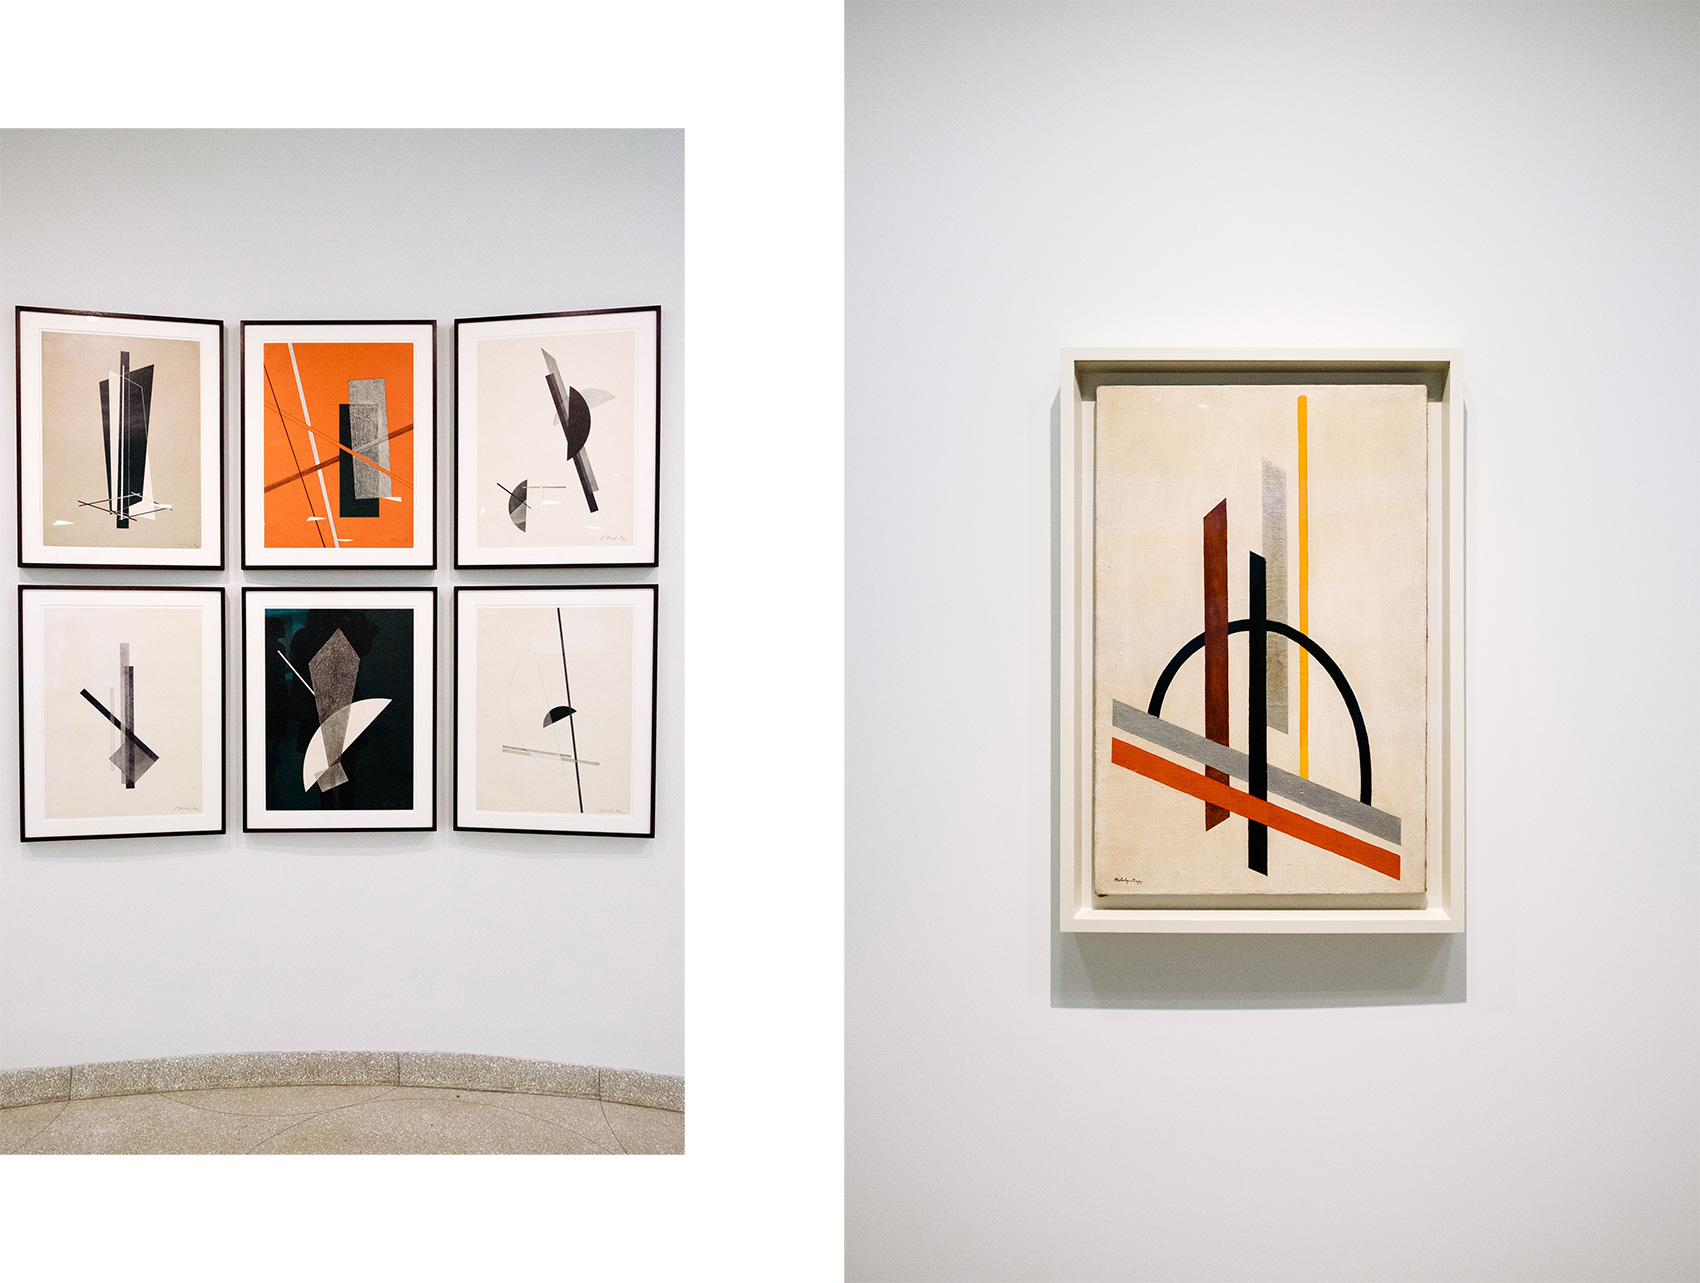 Works by Lazlo Moholy-Nagy in the Guggenheim Museum New York